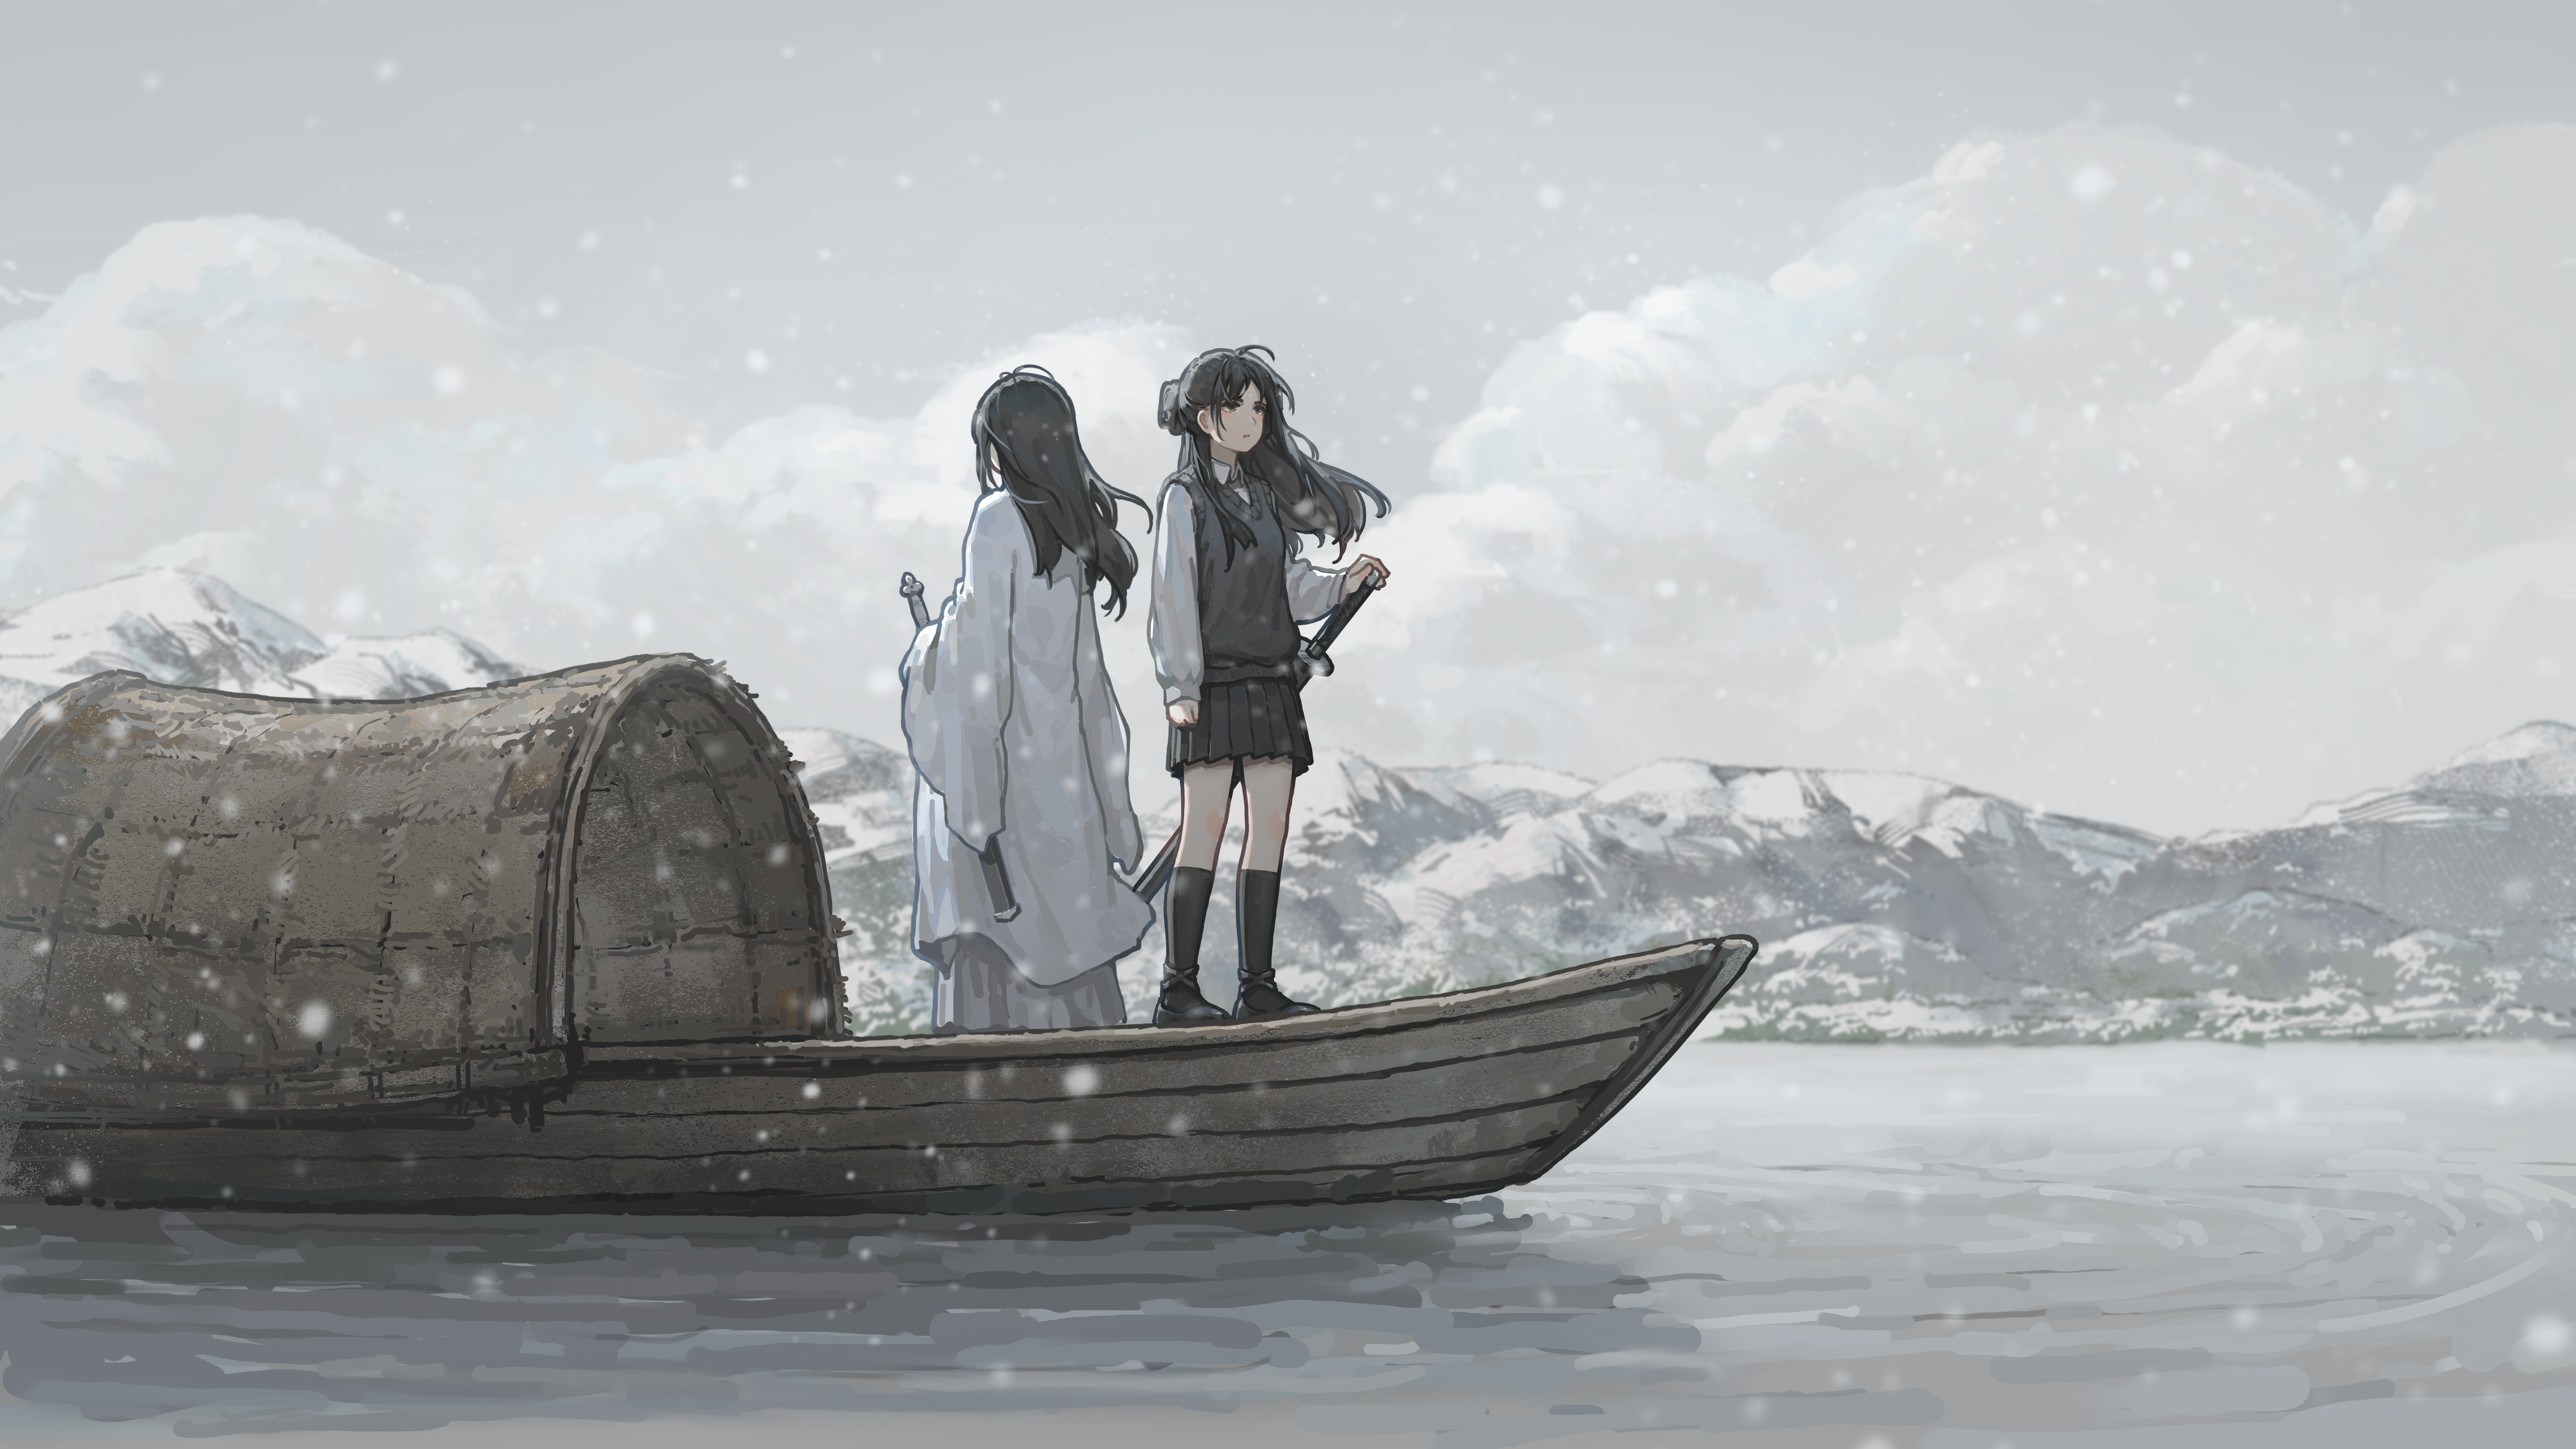 Anime 5253x2955 anime anime girls lake boat snowing illustration ancient Hua Ming wink water outdoors women outdoors snow clouds sky hair blowing in the wind wind standing skirt schoolgirl school uniform long sleeves sword frills long hair